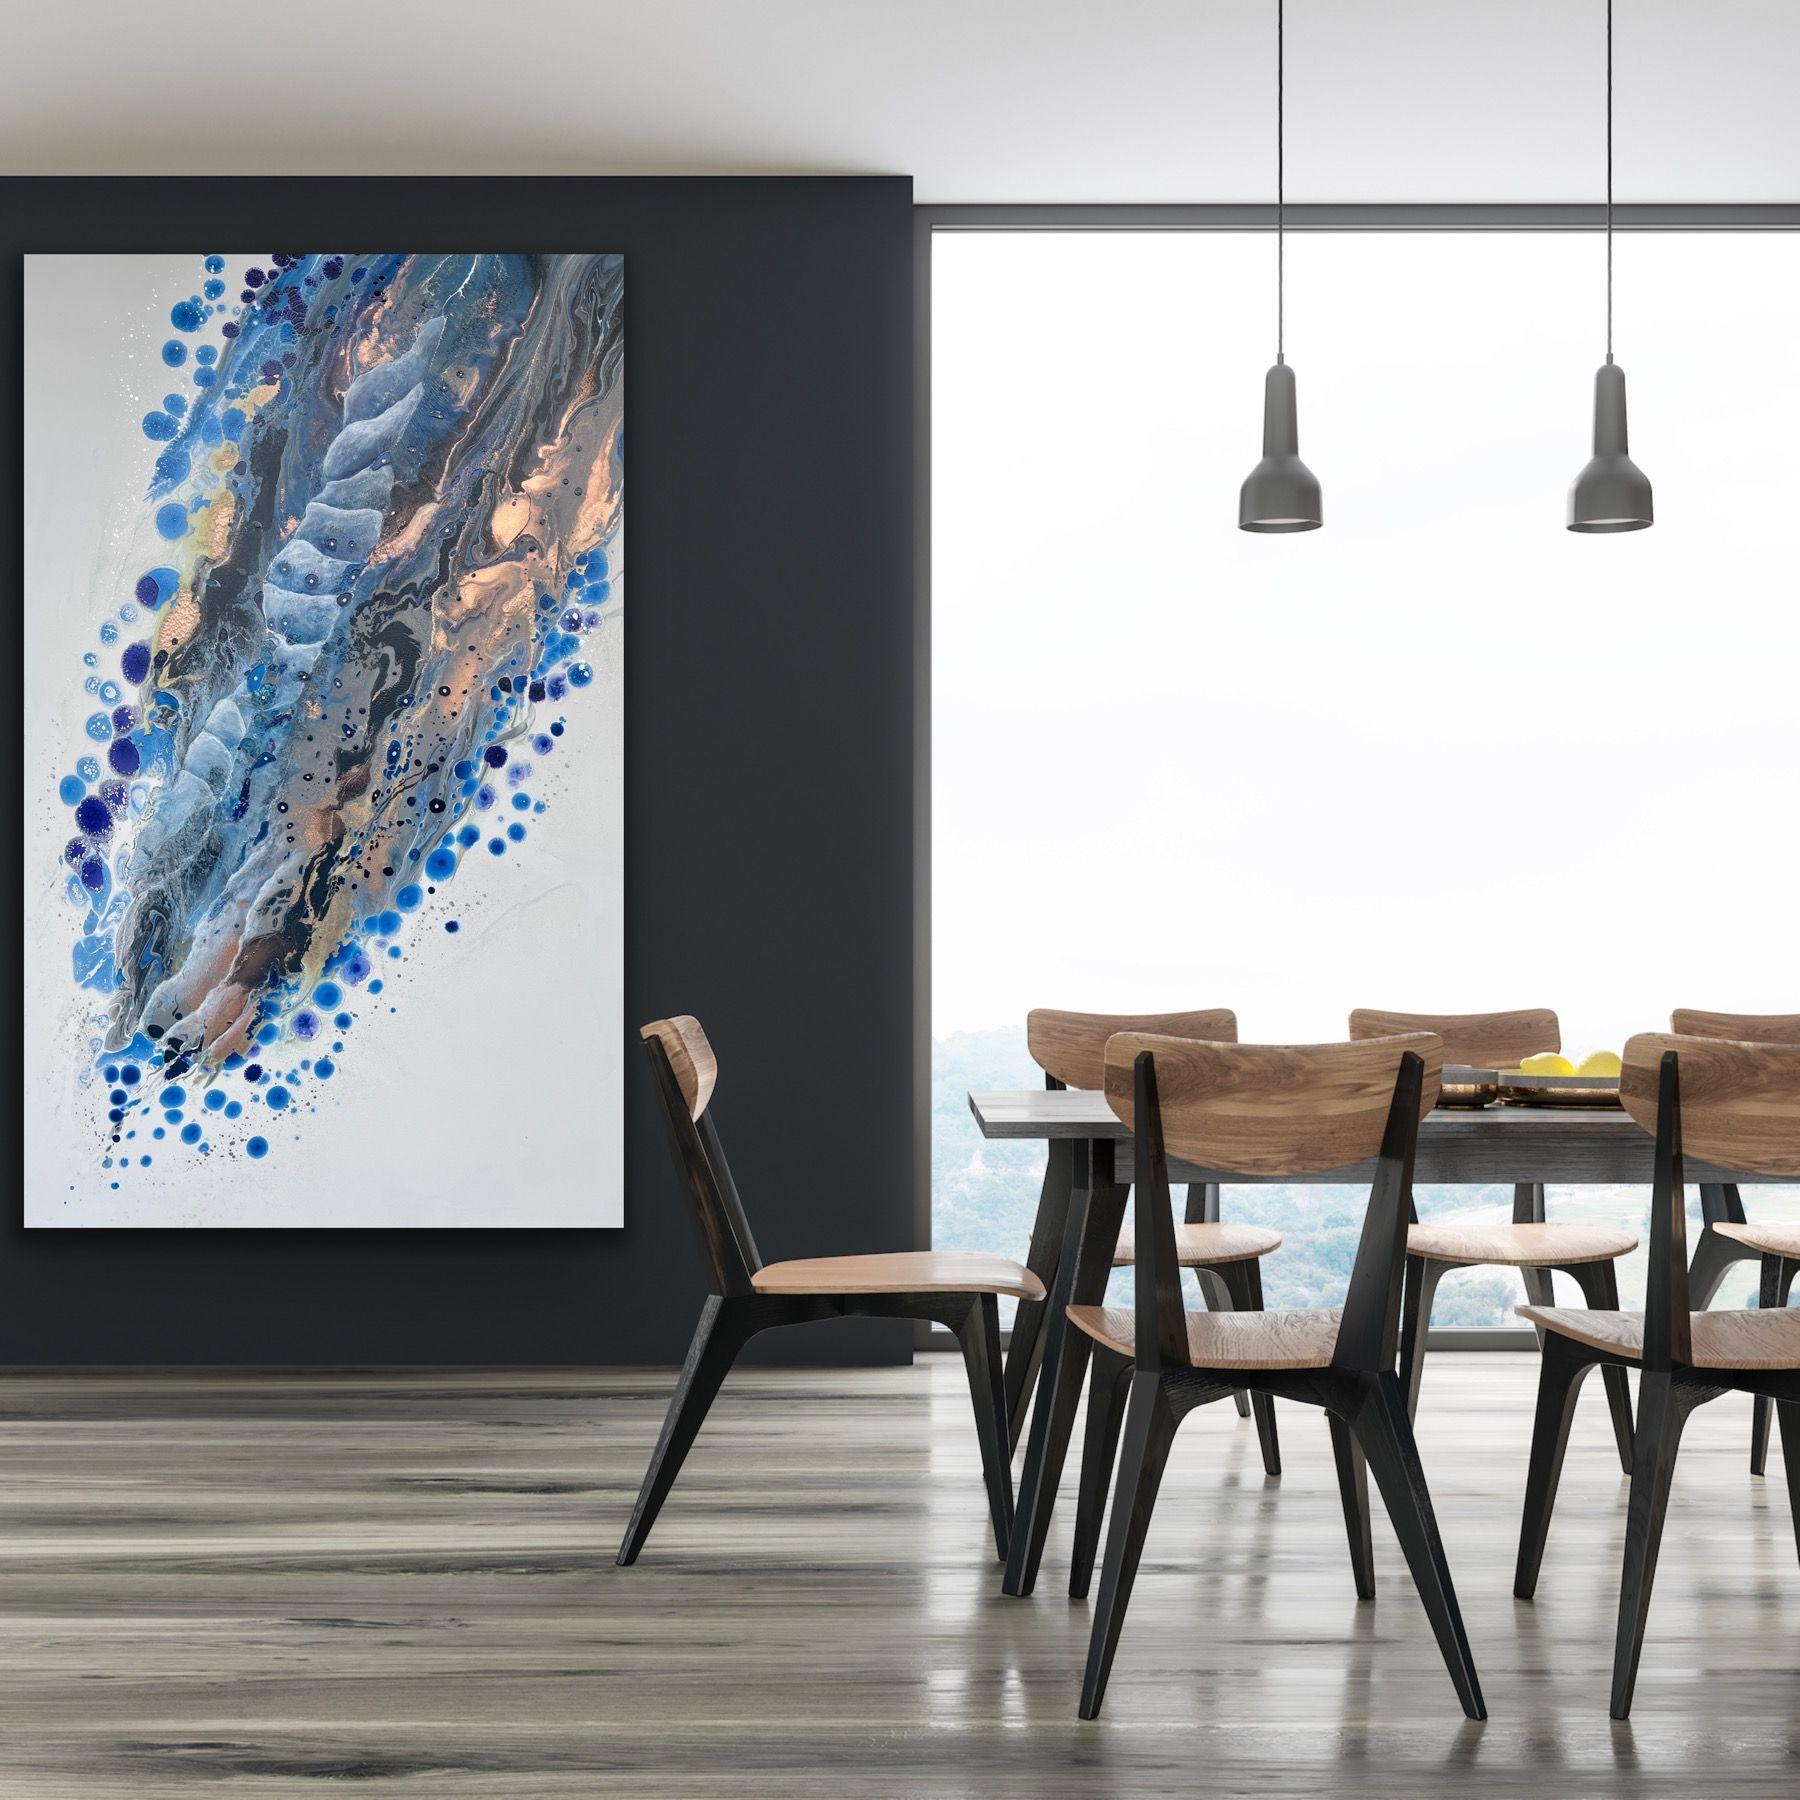 This collection is inspired in the deep ocean. The deep ocean has always been a mistery for me, in this series I wanted to make my own interpretation of the jellyfish and the bubbles that surround the Darkness of the ocean. Every element has its own